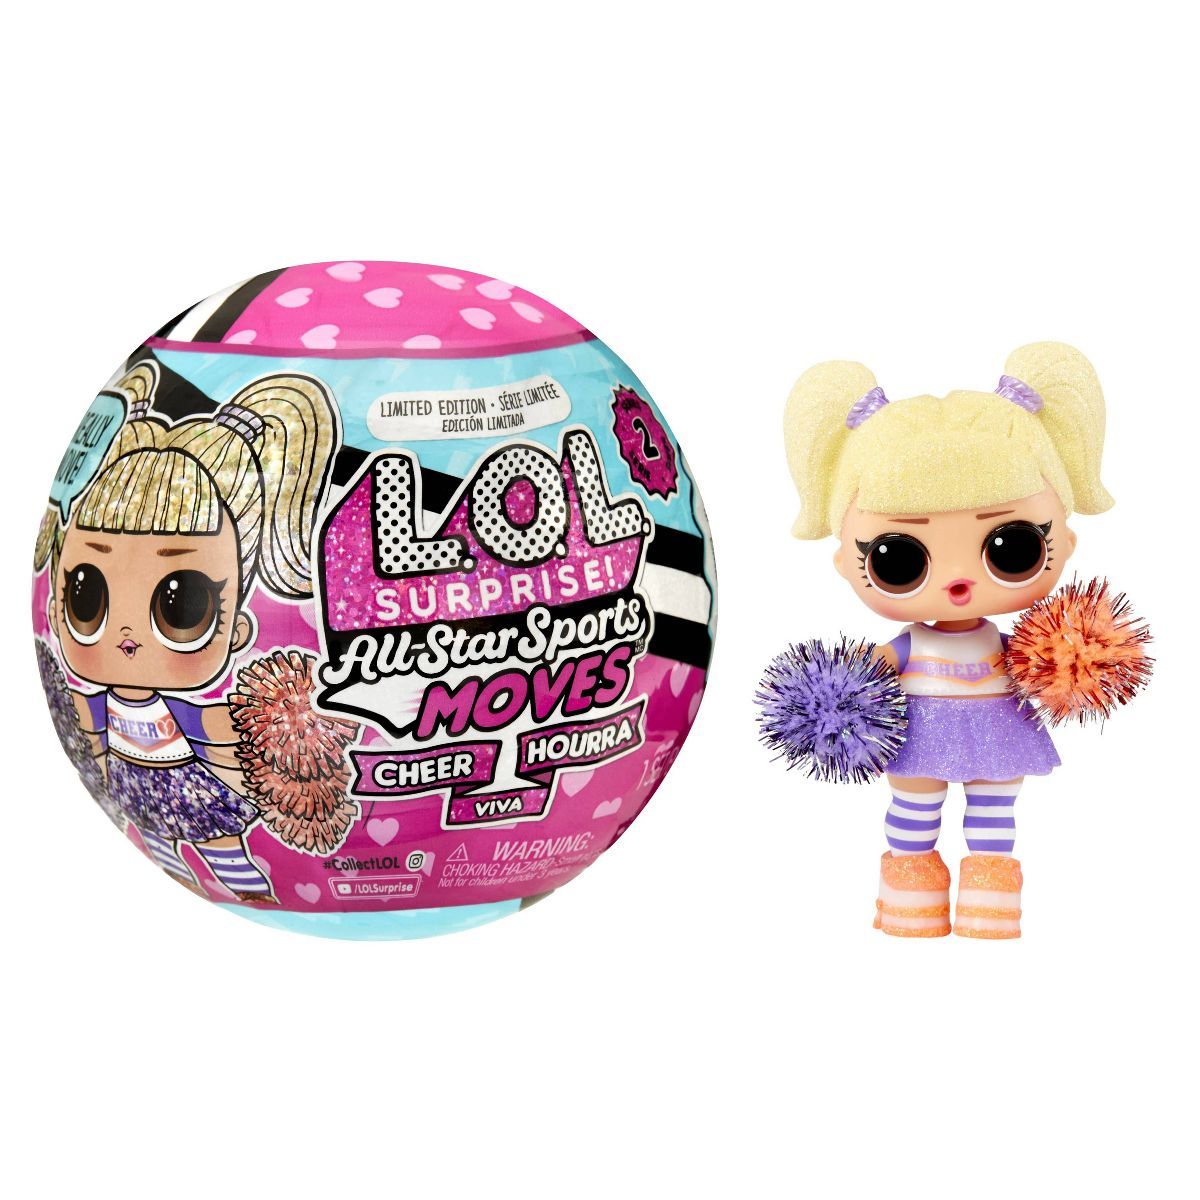 L.O.L. Surprise! All Star Sports Moves - Cheer Surprise Doll | Target